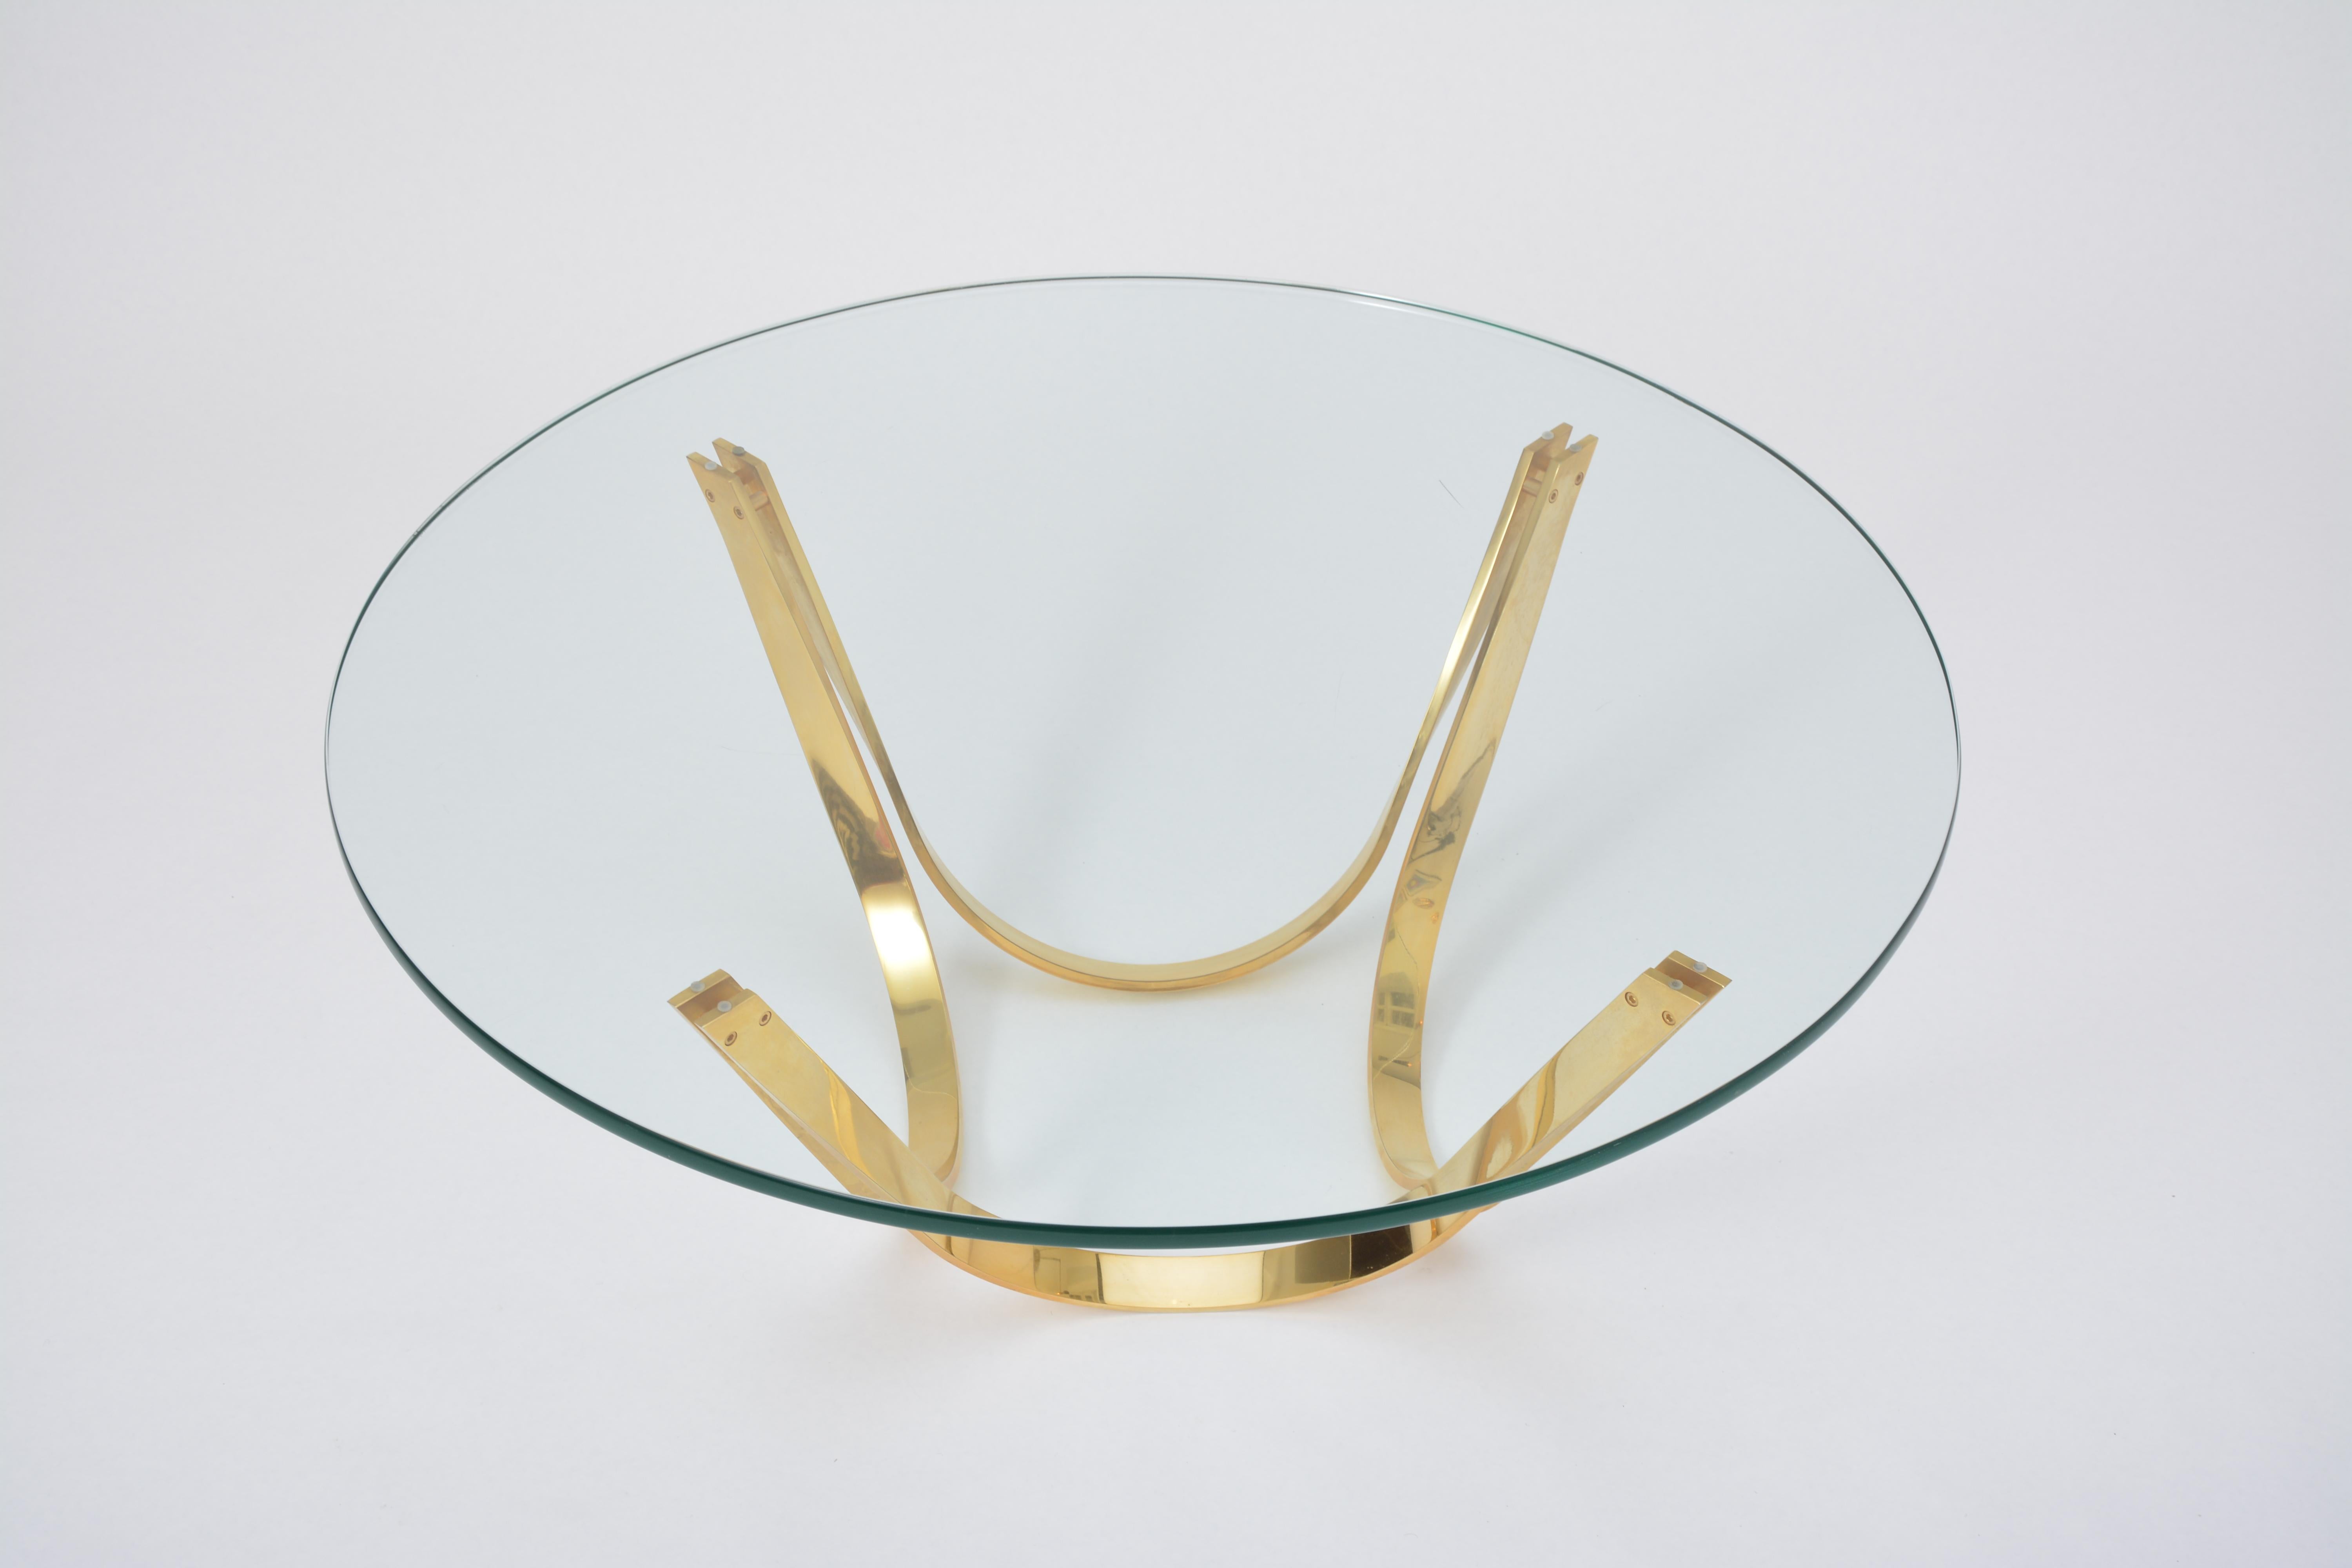 This round coffee table was designed by Roger Sprunger and produced by American company Dunbar in the 1970s. The base is made of gilded chrome steel. The top is made of thick glass.